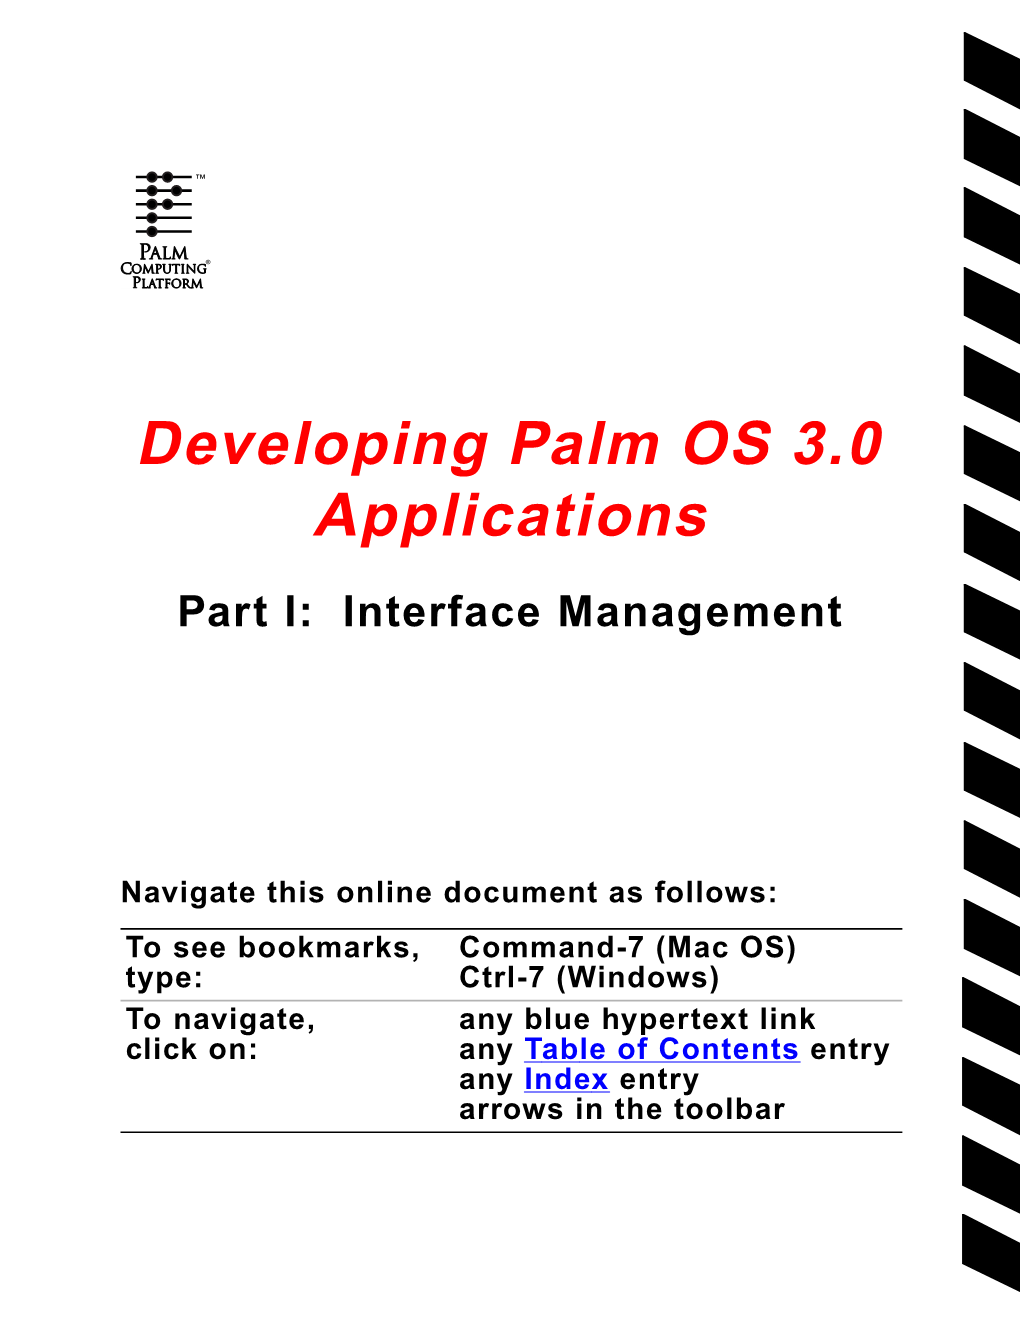 Developing Palm OS 3.0 Applications